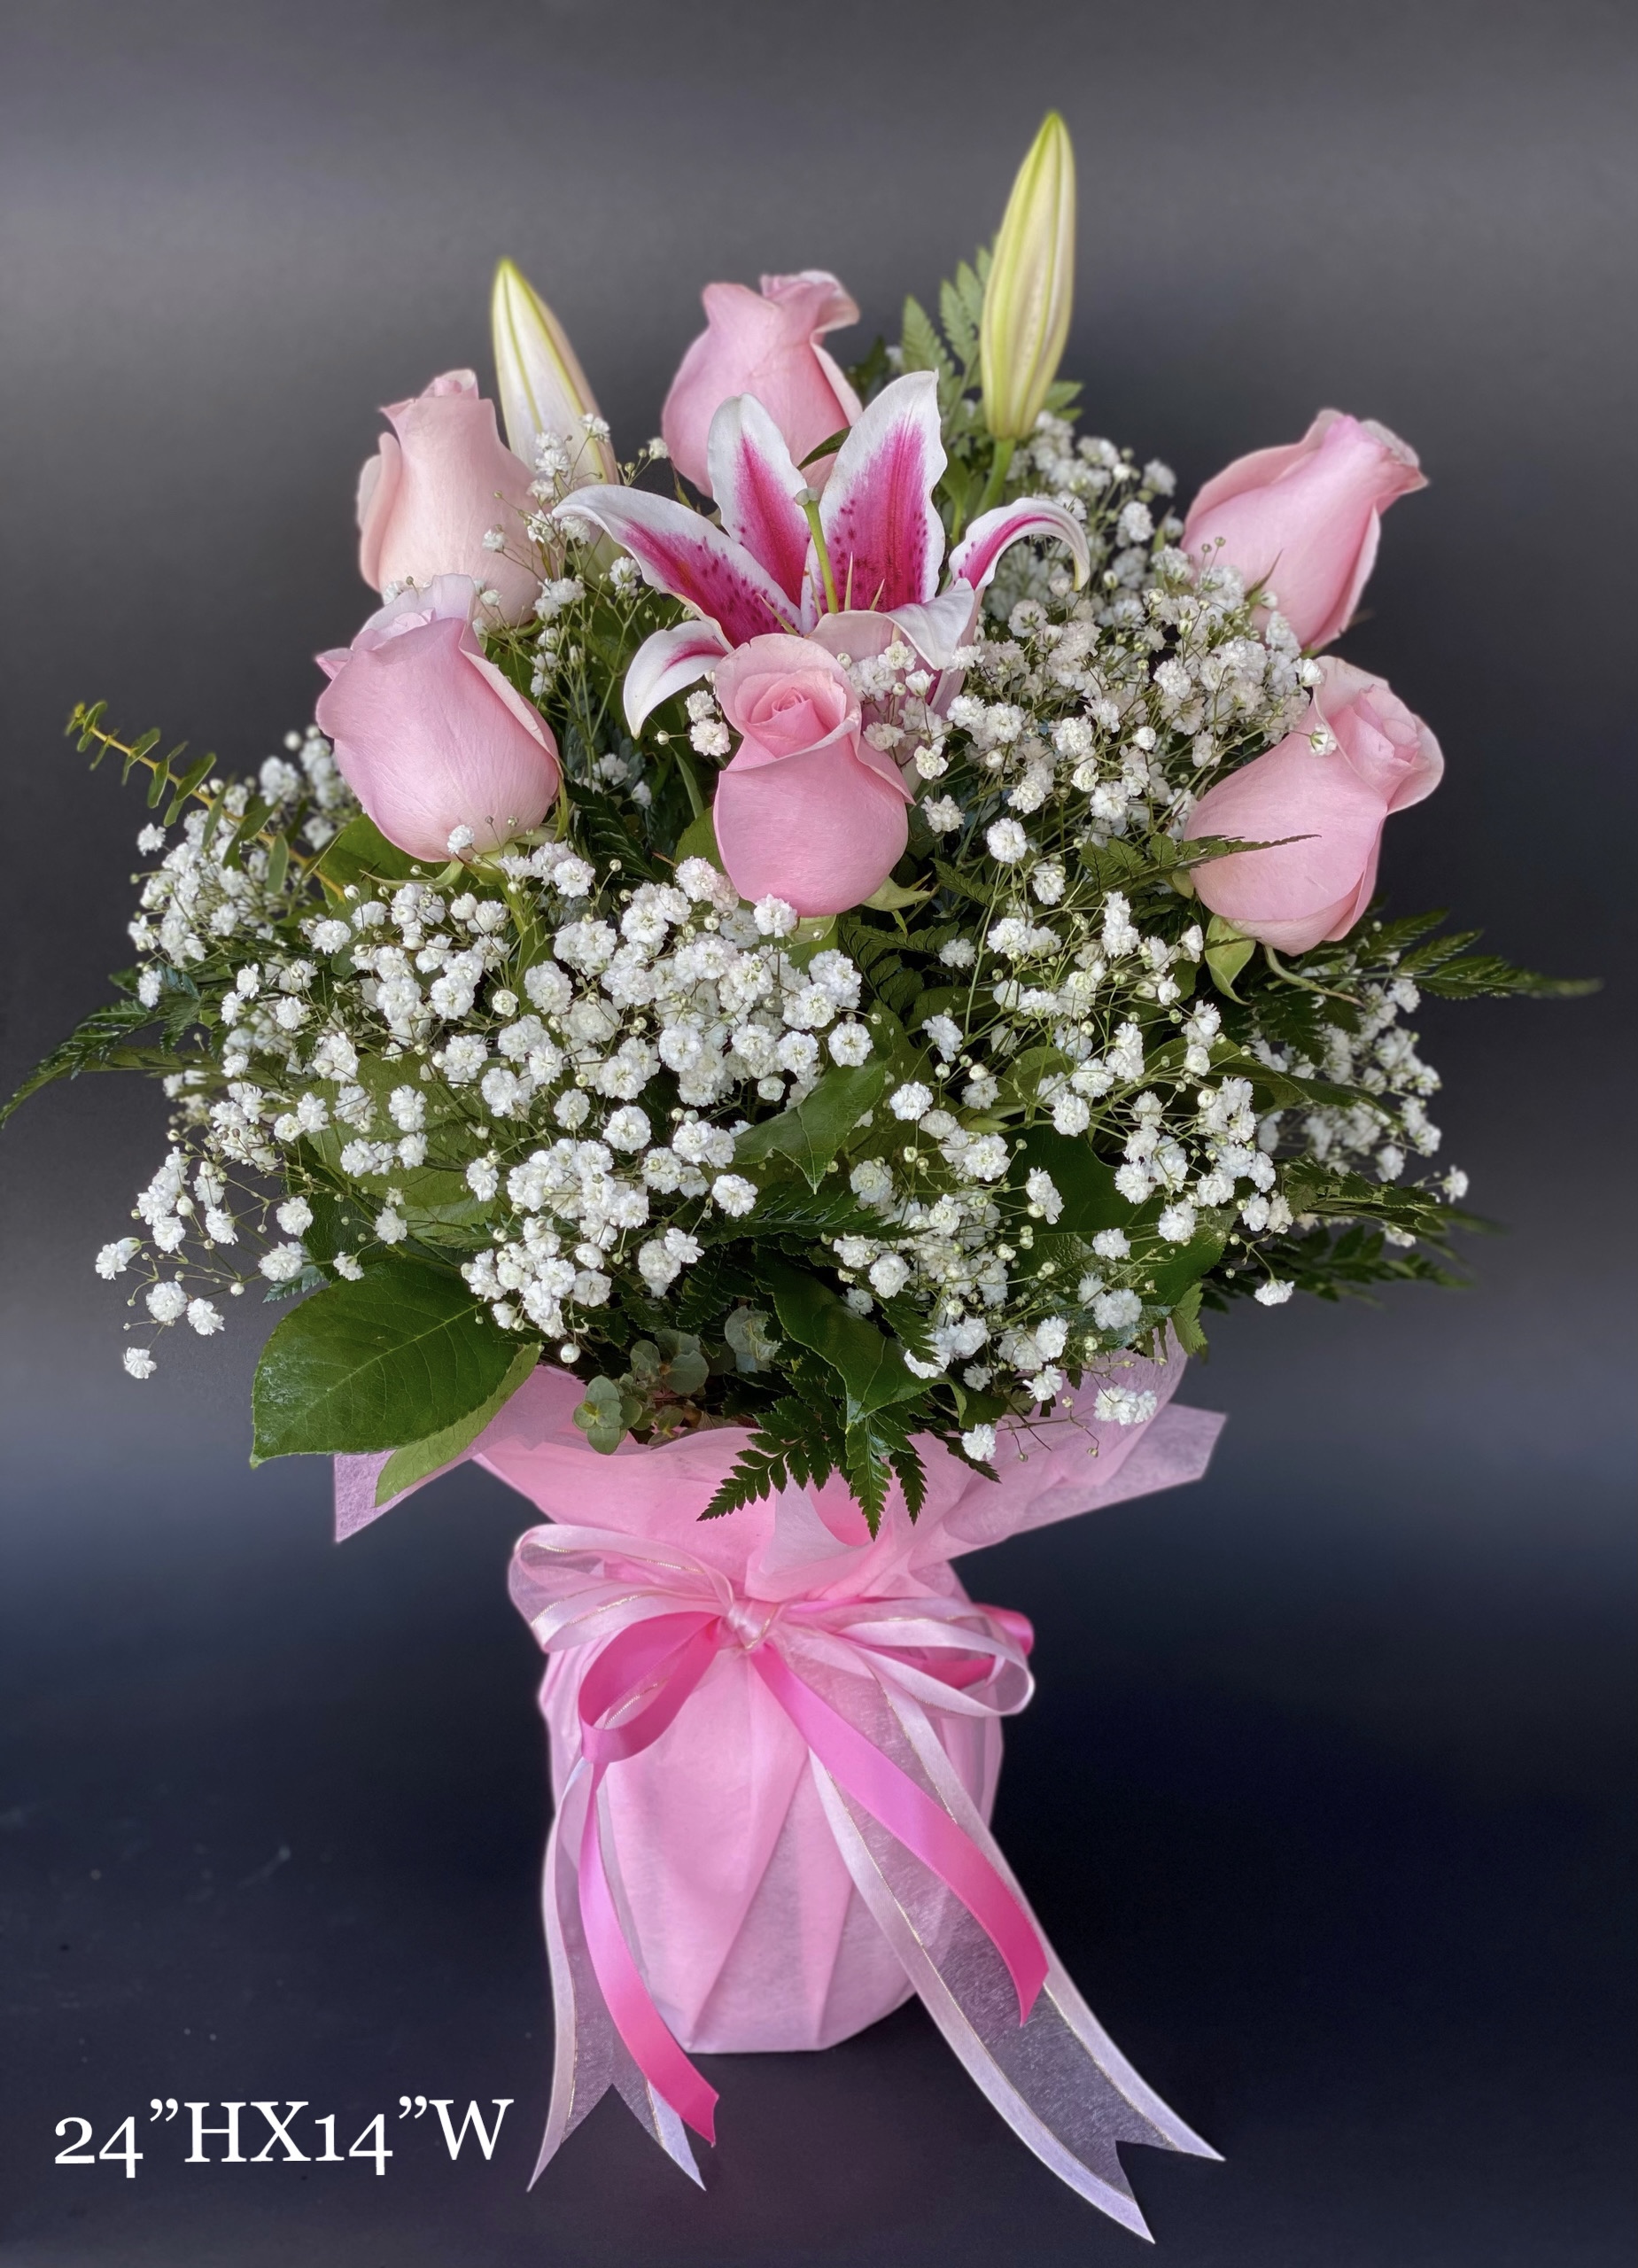 Simply Stunning Roses
$69.99 + Tax